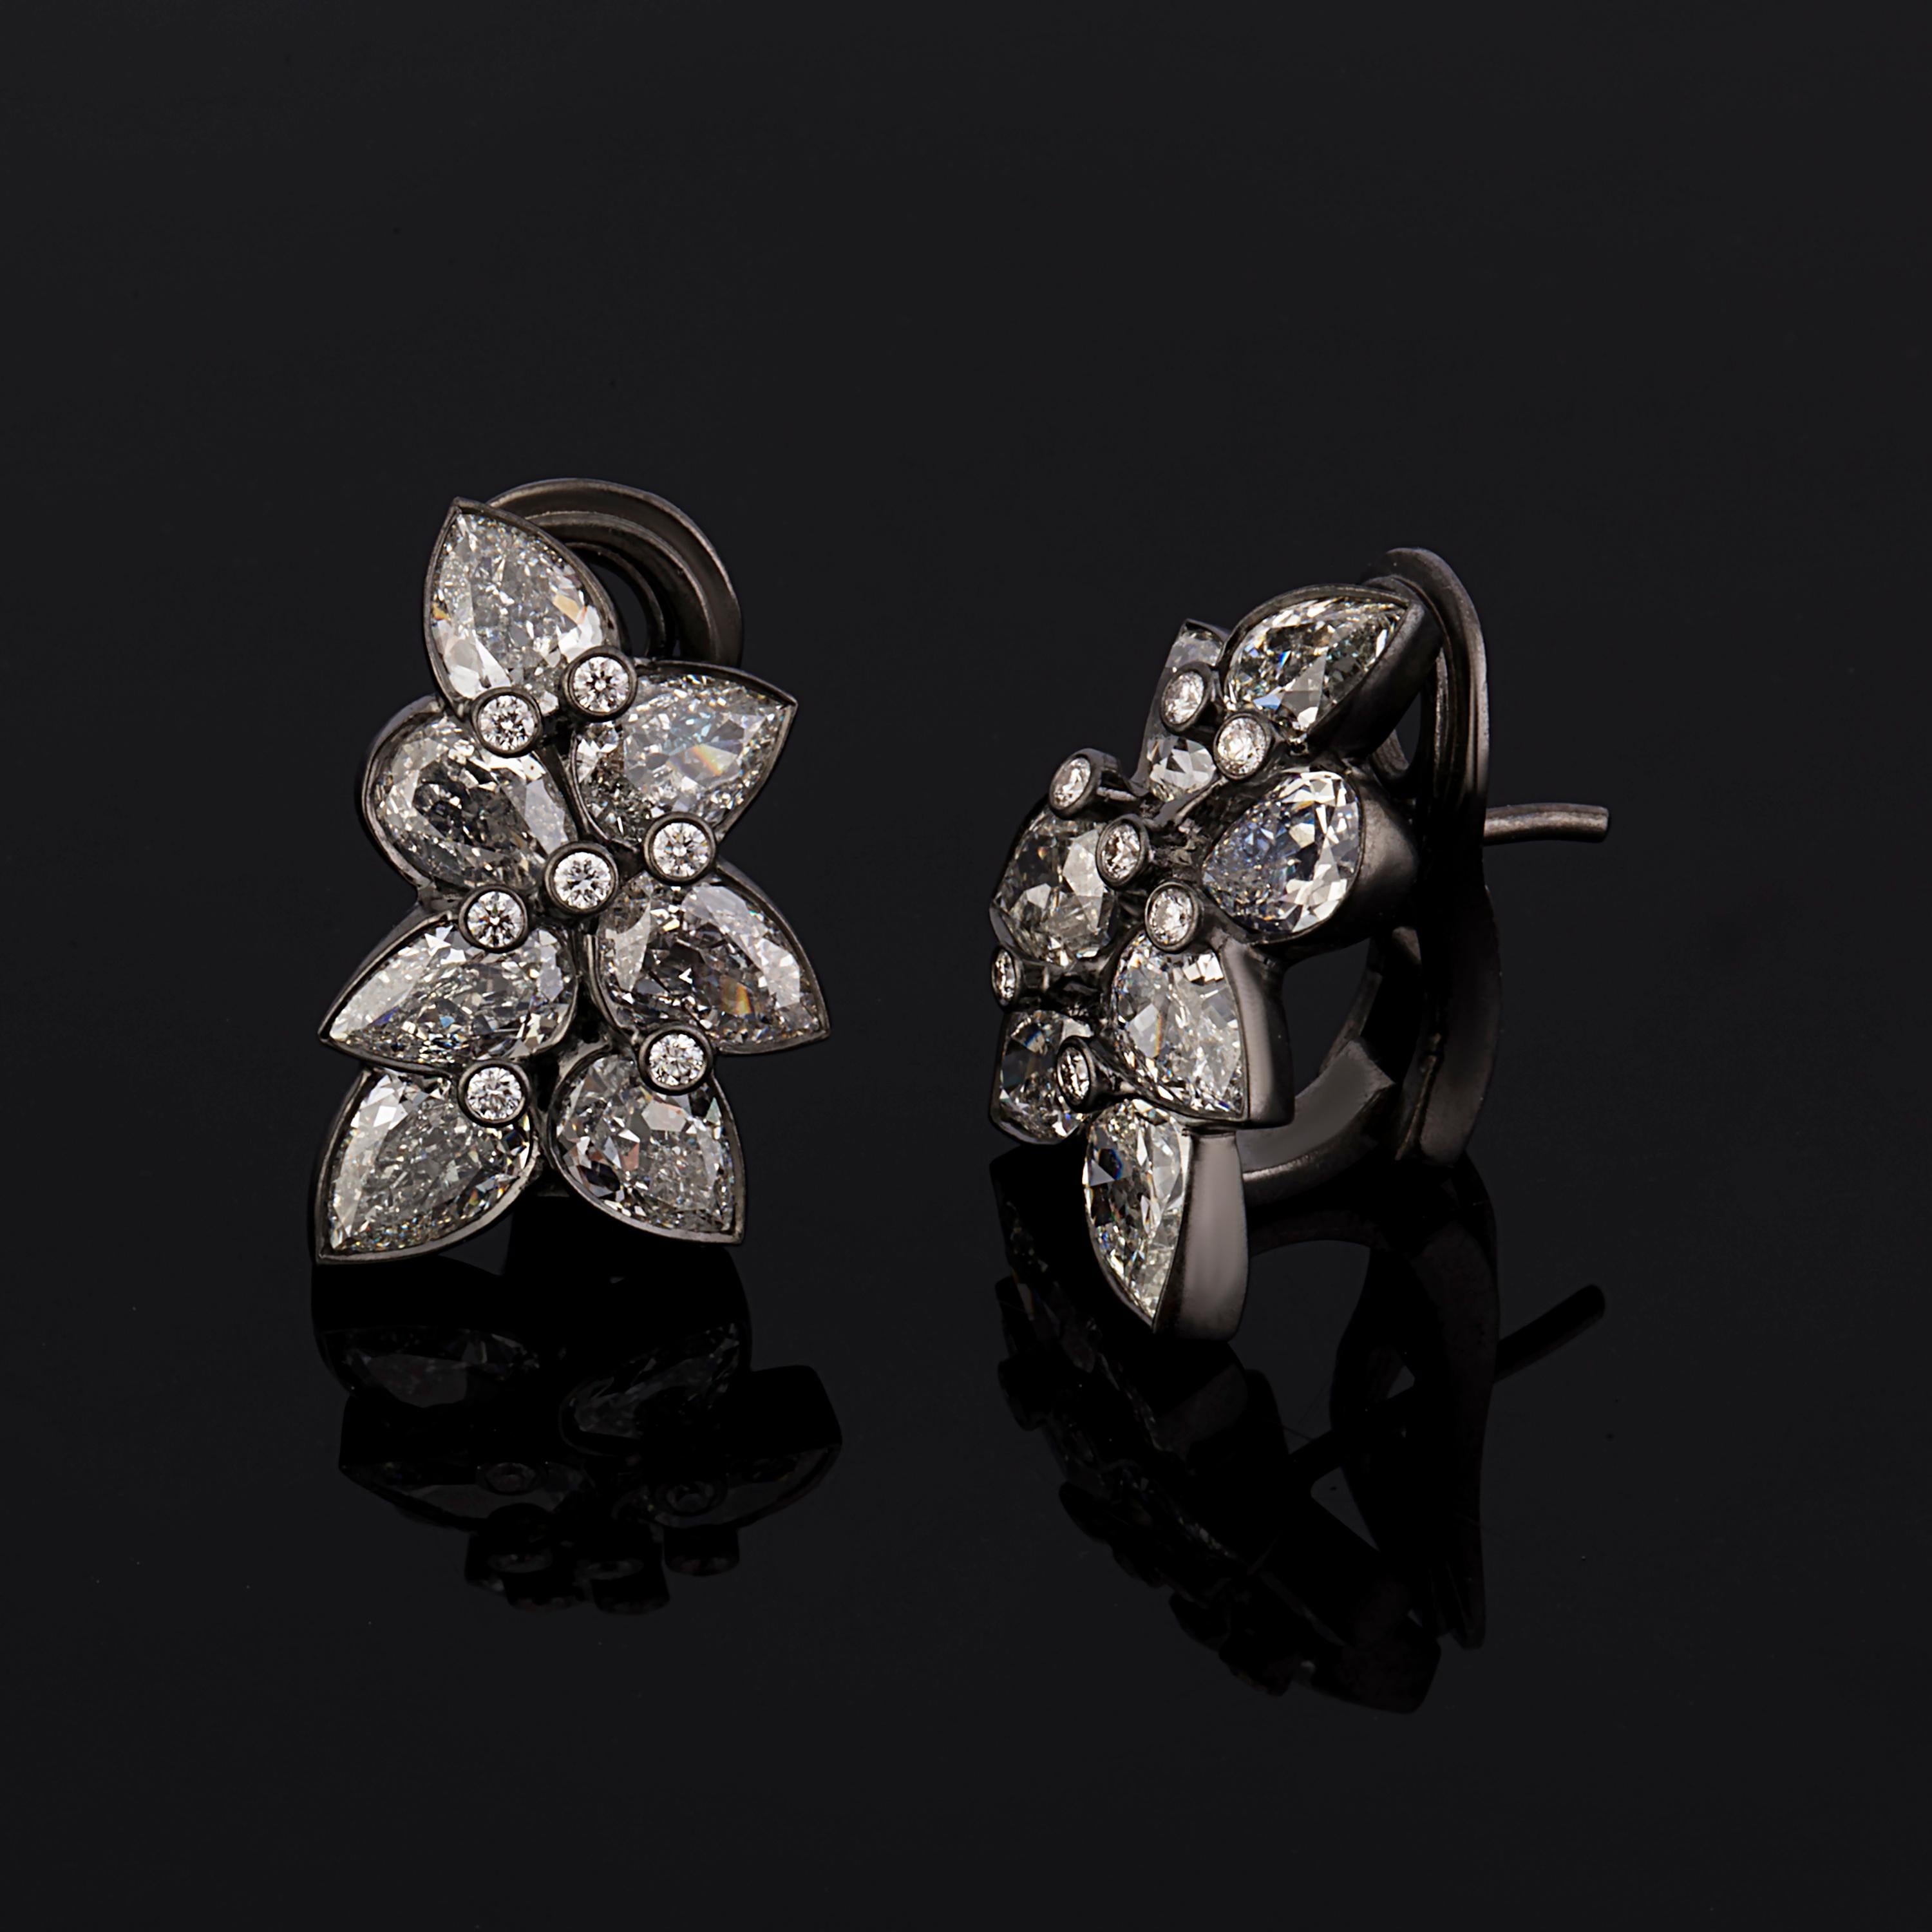 This Beautiful Floral / Leaf Cluster Earring is Nature Inspired.
It has 4.49 Carat Old Cut Pear Diamonds G/H Color Si quality , 0.42 Carat Round Brilliant Diamonds G/H color VS Quality and 7.49 grams 18 Karat Blackened Gold. 
This Earring is Hand